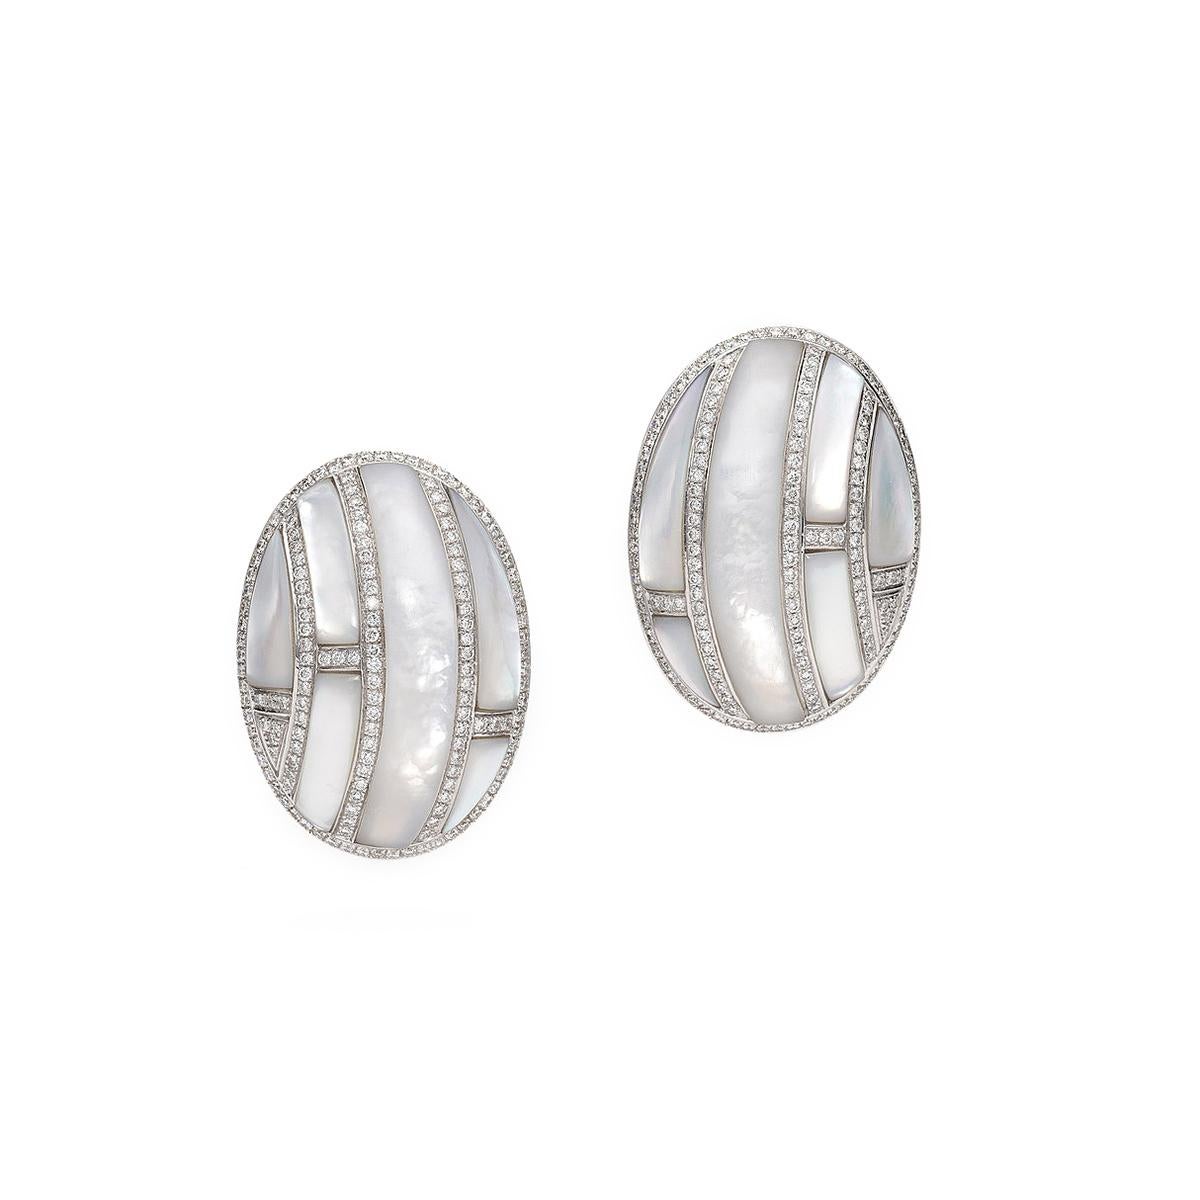 Earrings in 18kt white gold set with 306 diamonds 2.14 cts and 12 mother of pearls 12.75 cts